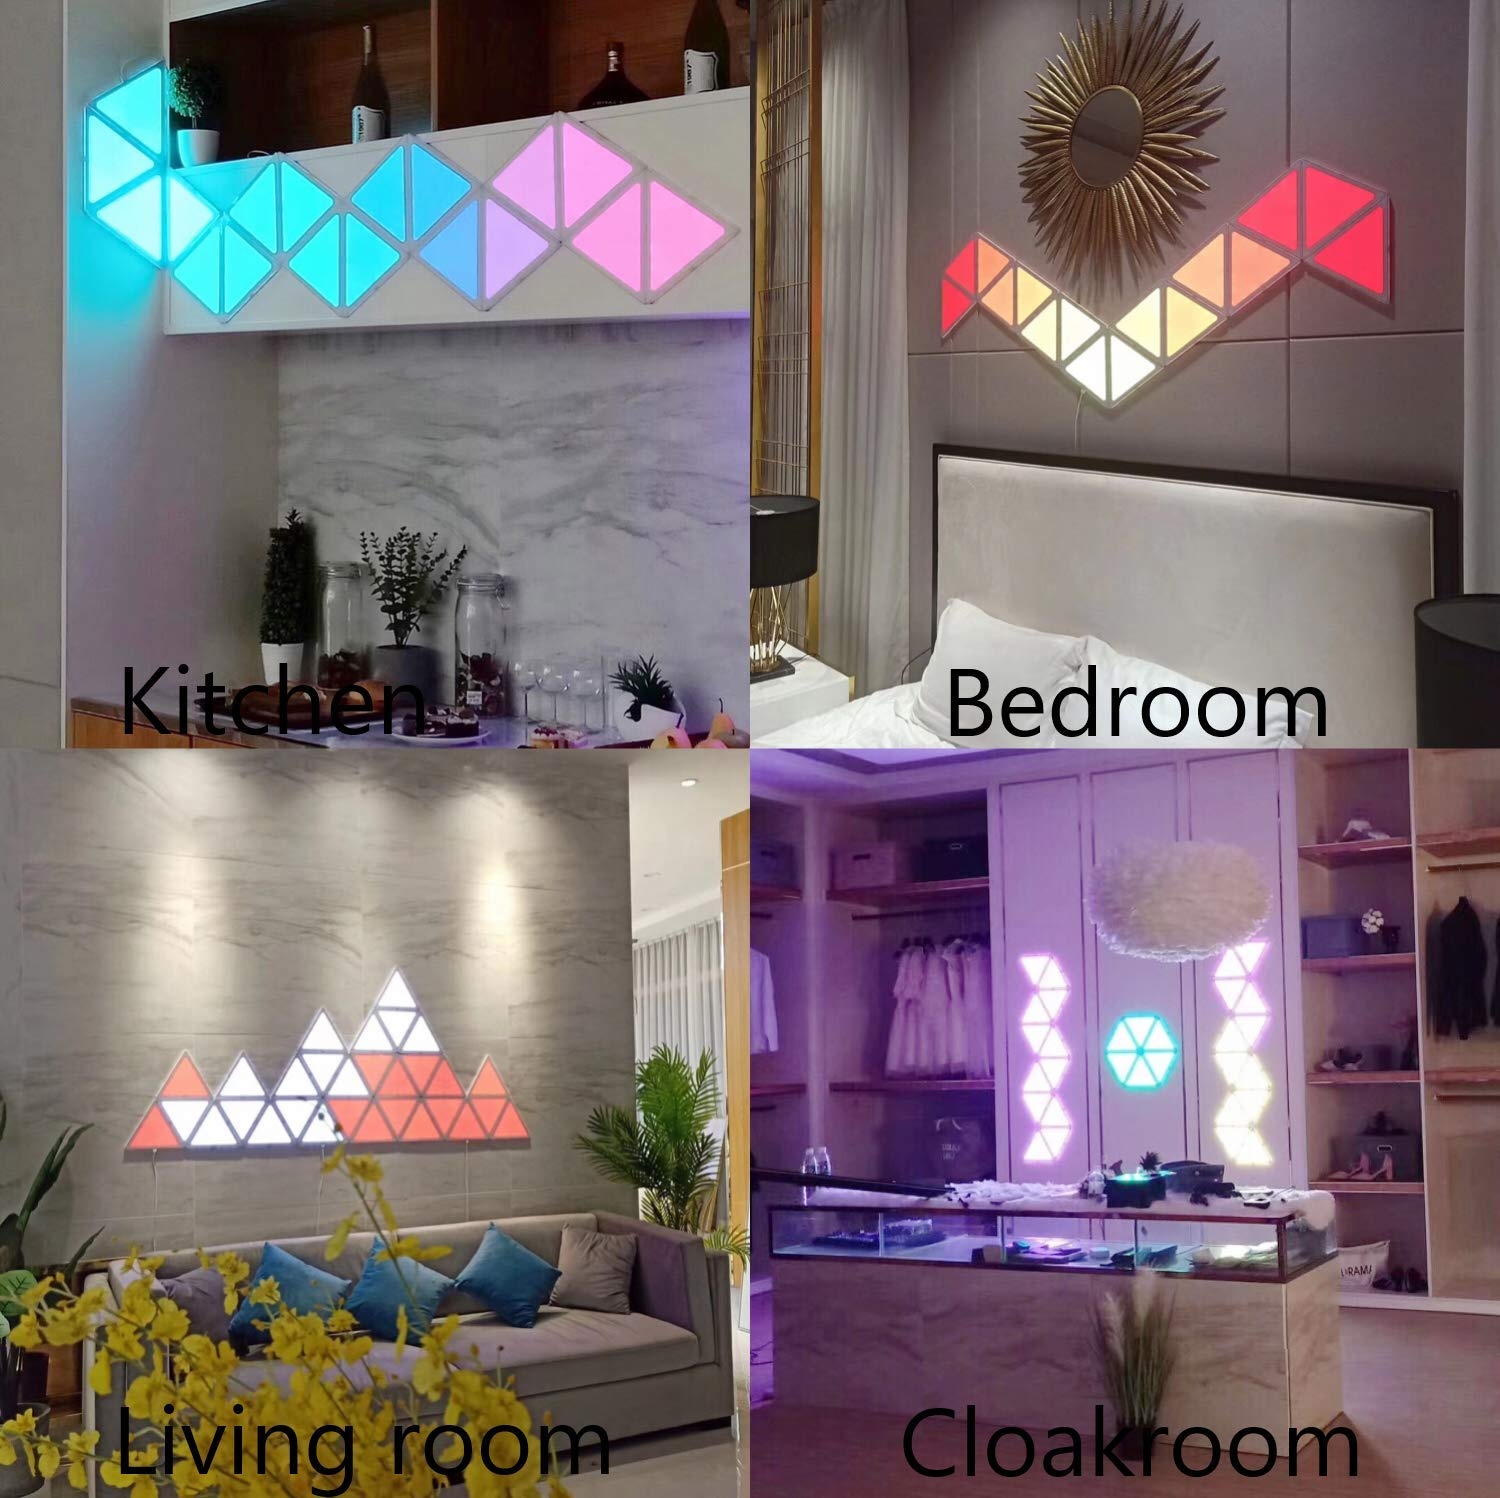 3pcs led lights customize Laser engraving 8 patterns selectable wall light decorative light for kids room